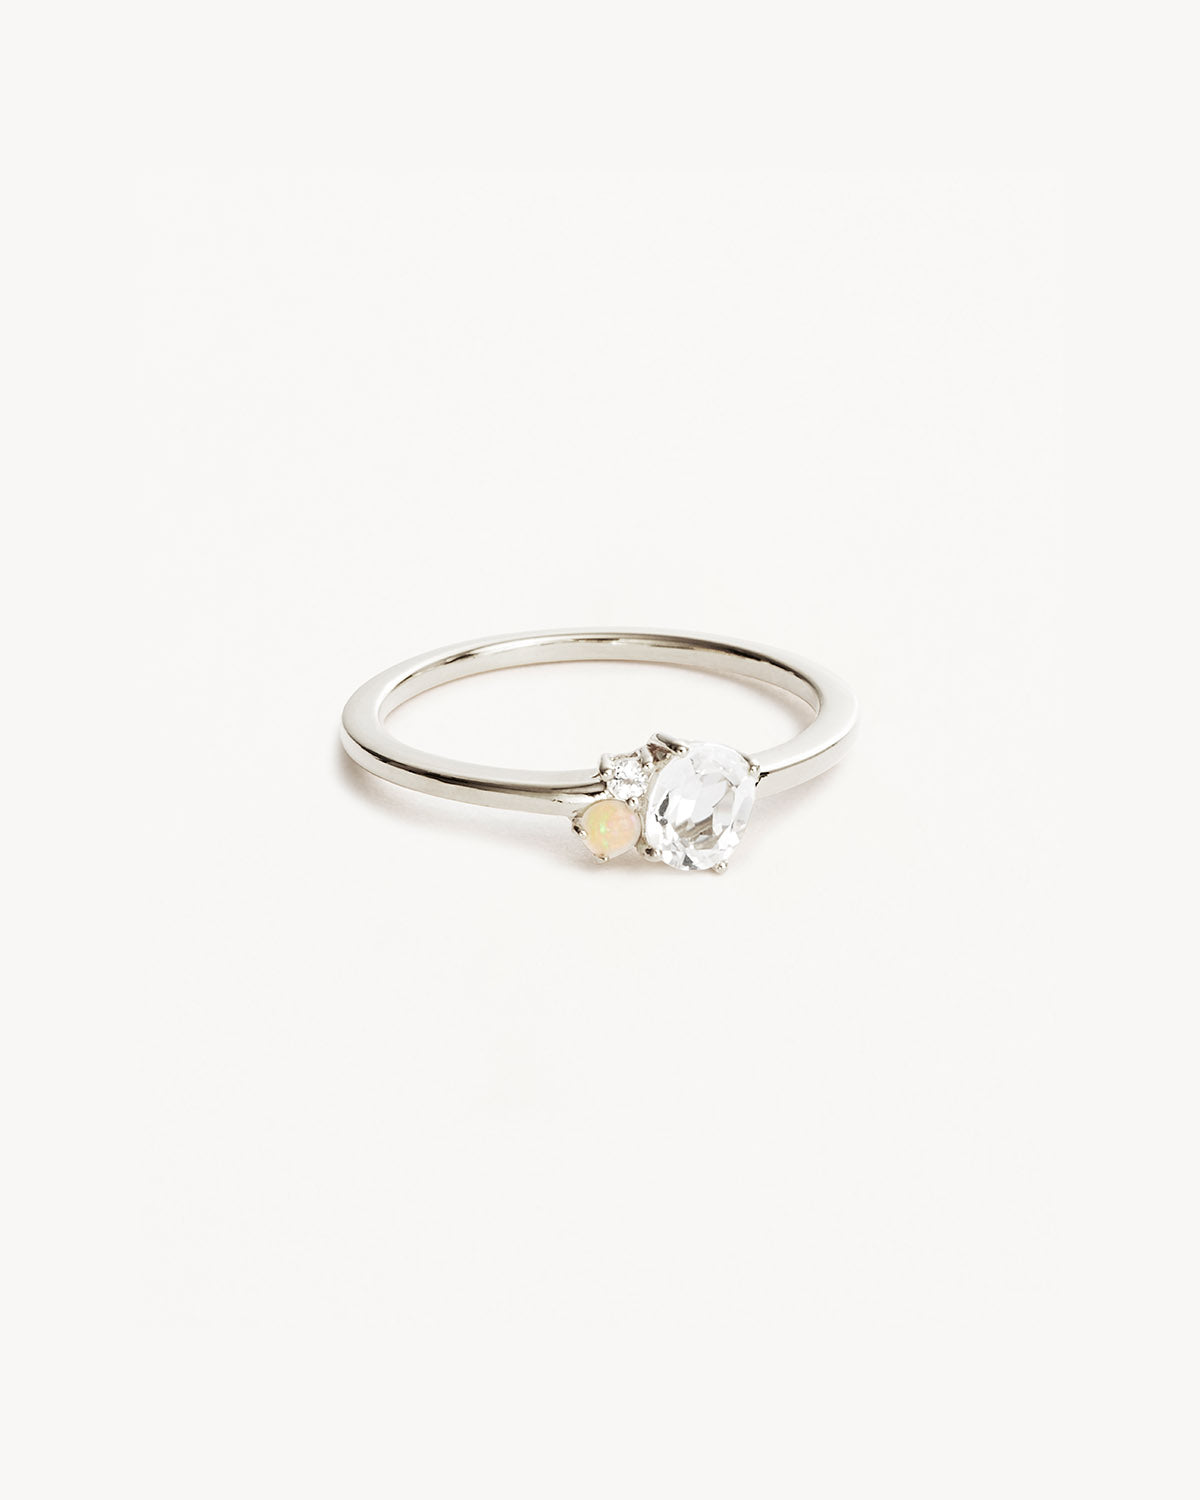 By Charlotte Kindred April Birthstone Ring, Gold or Silver